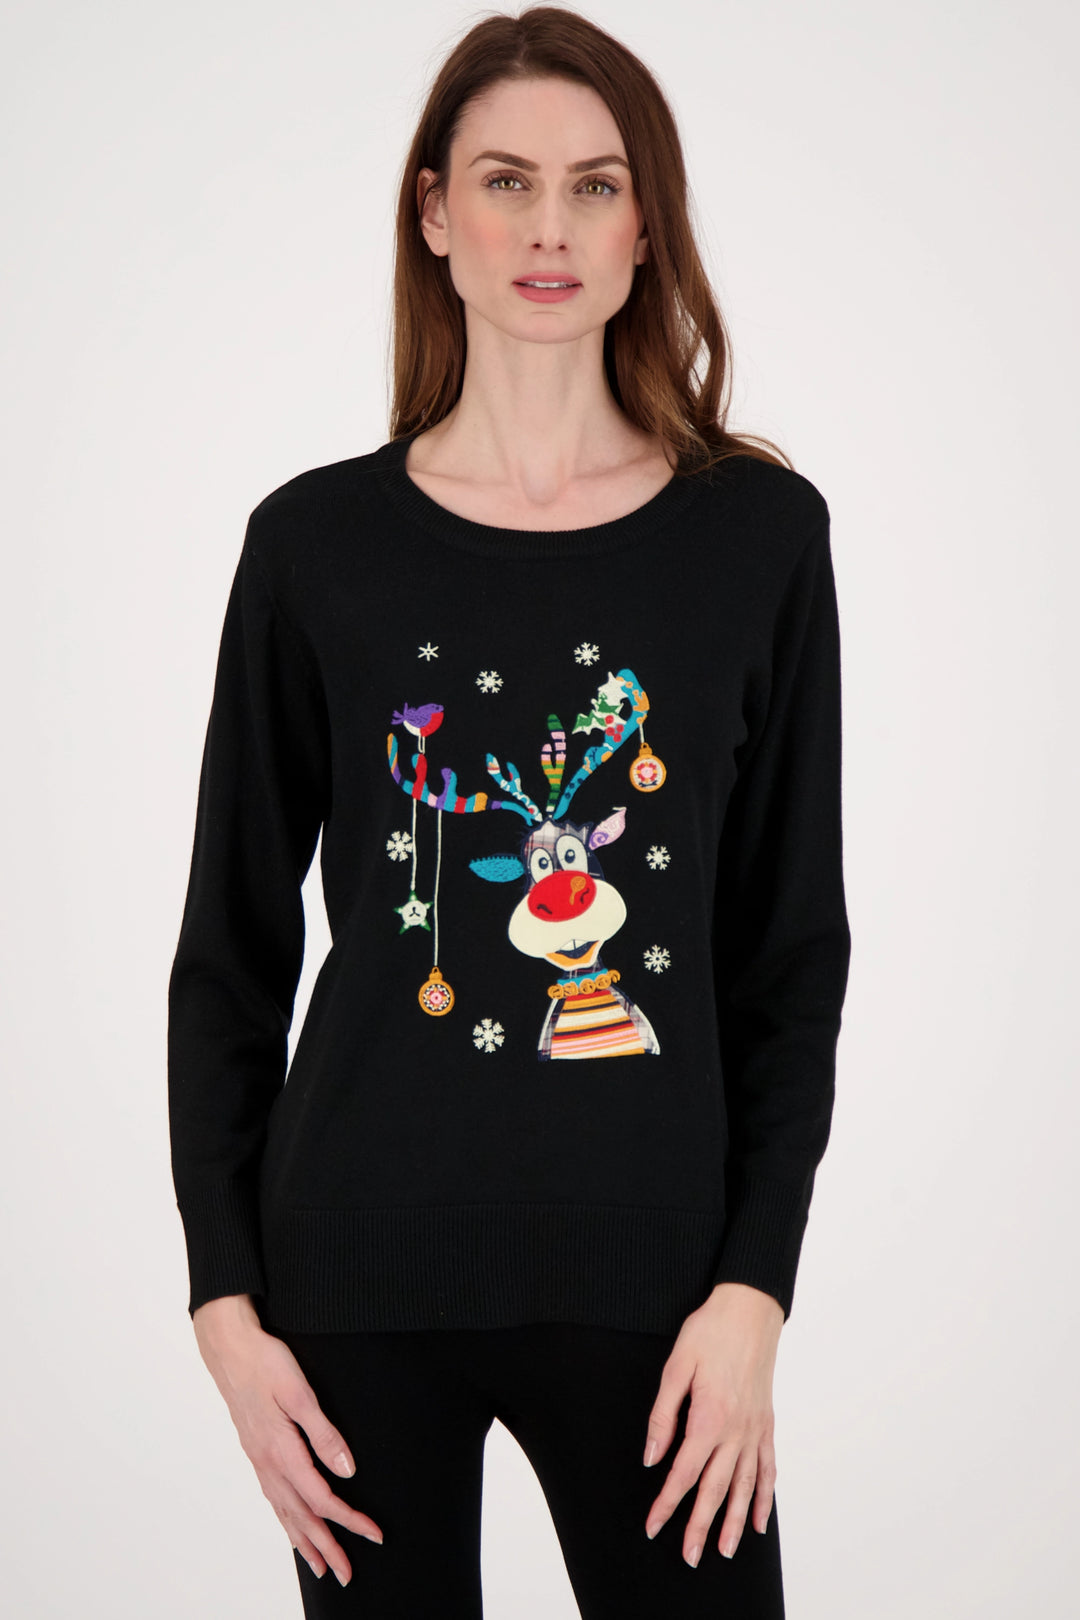 This cute light sweater features a jolly reindeer adorned with bells on the front, perfect for the holiday cheer!